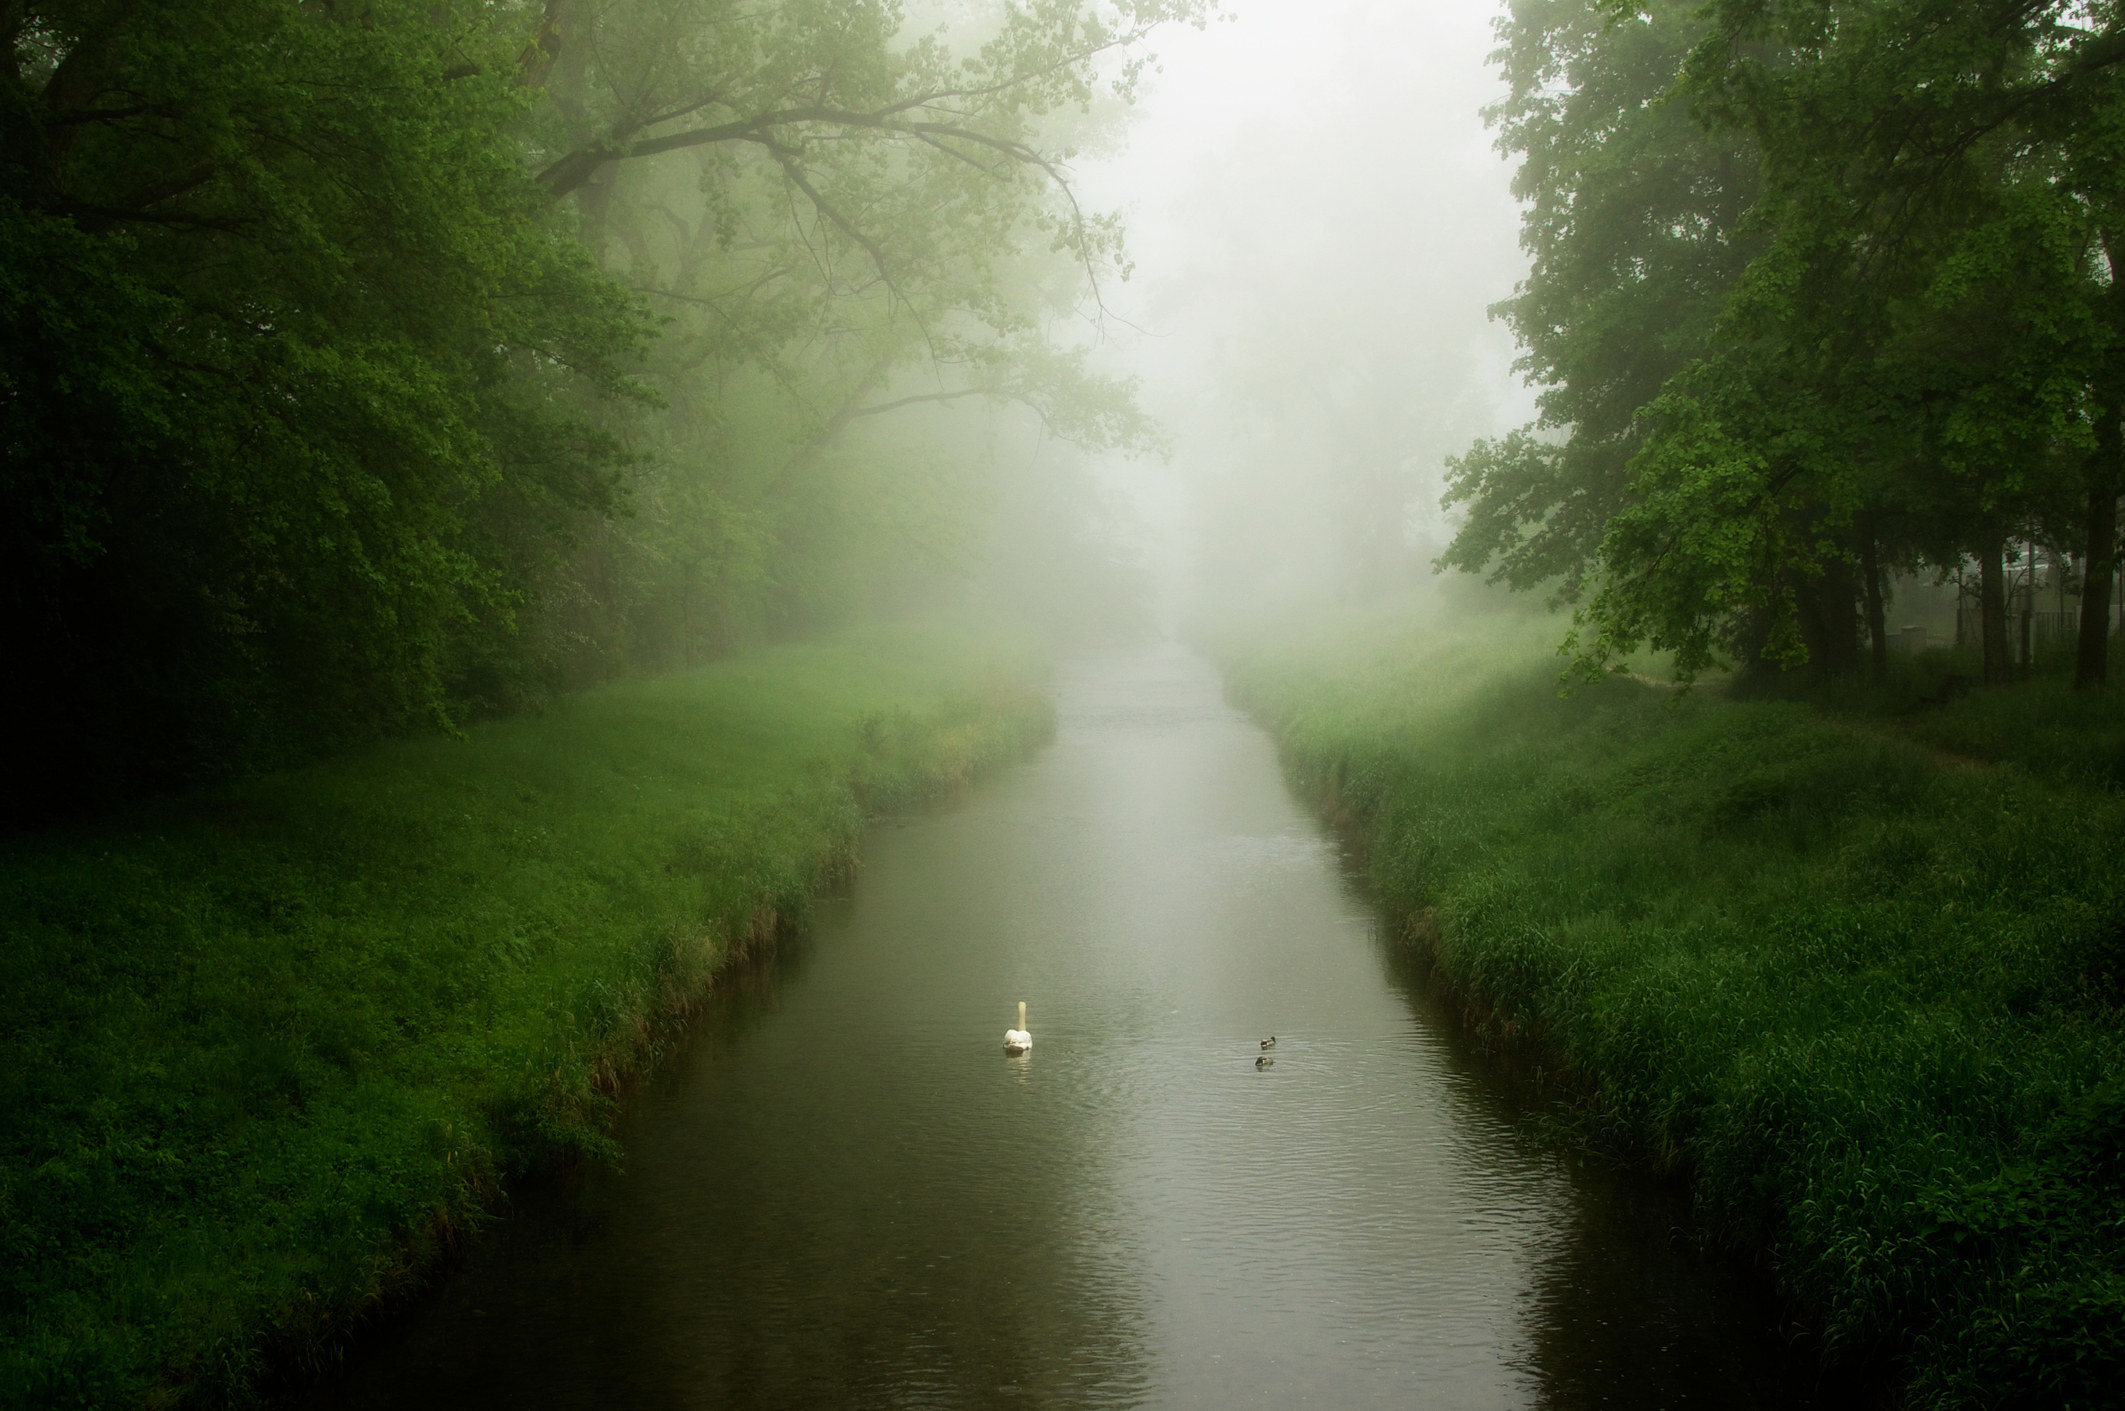 Tree-lined canal in fog